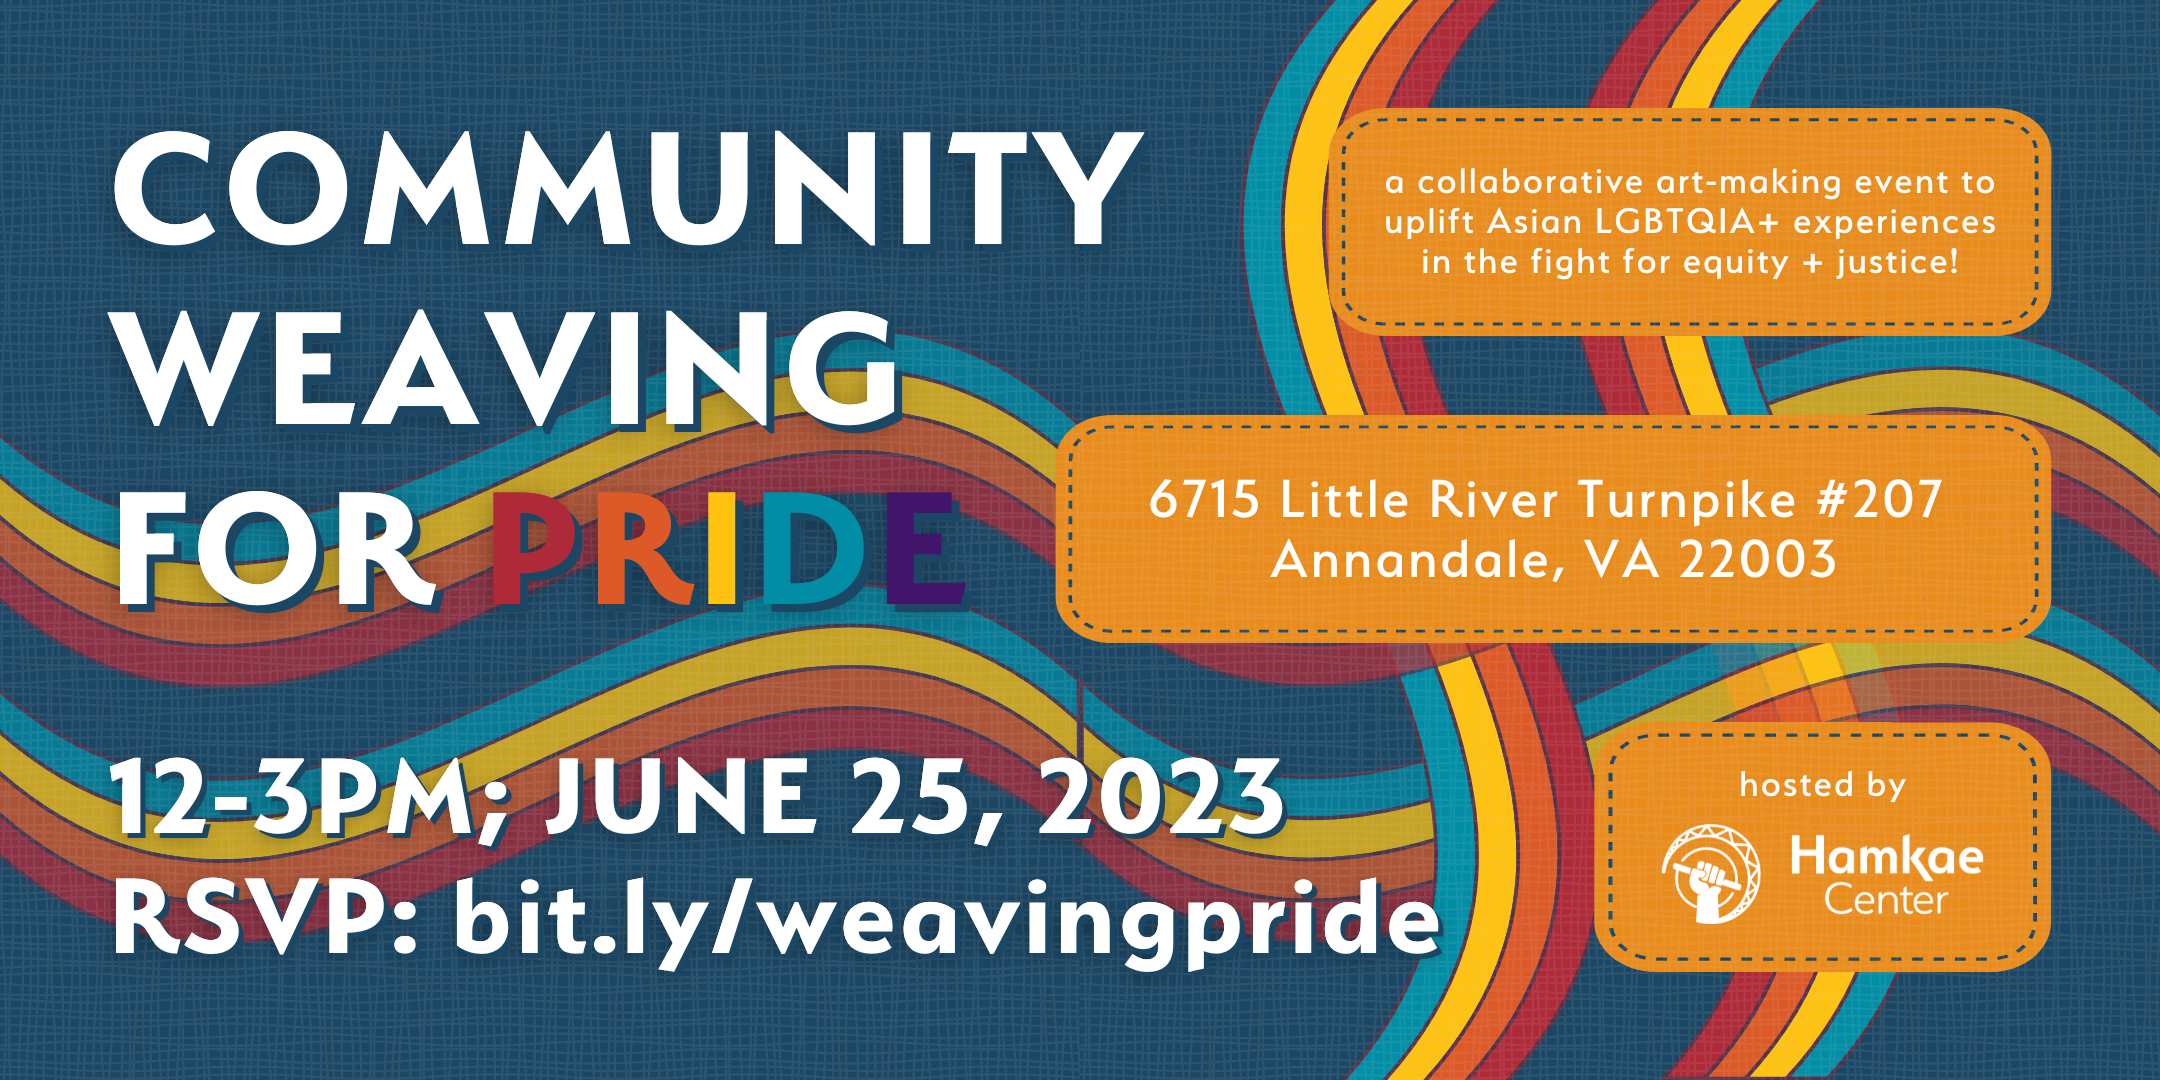 Community Weaving for Pride: a collaborative art-making event to uplift Asian LGBTQIA+ experiences in the fight for equity + justice! 6715 Little River Turnpike #207, Annandale, VA 22003 12-3pm; June 25, 2023 RSVP: bit.ly/weavingpride hosted by Hamkae Center